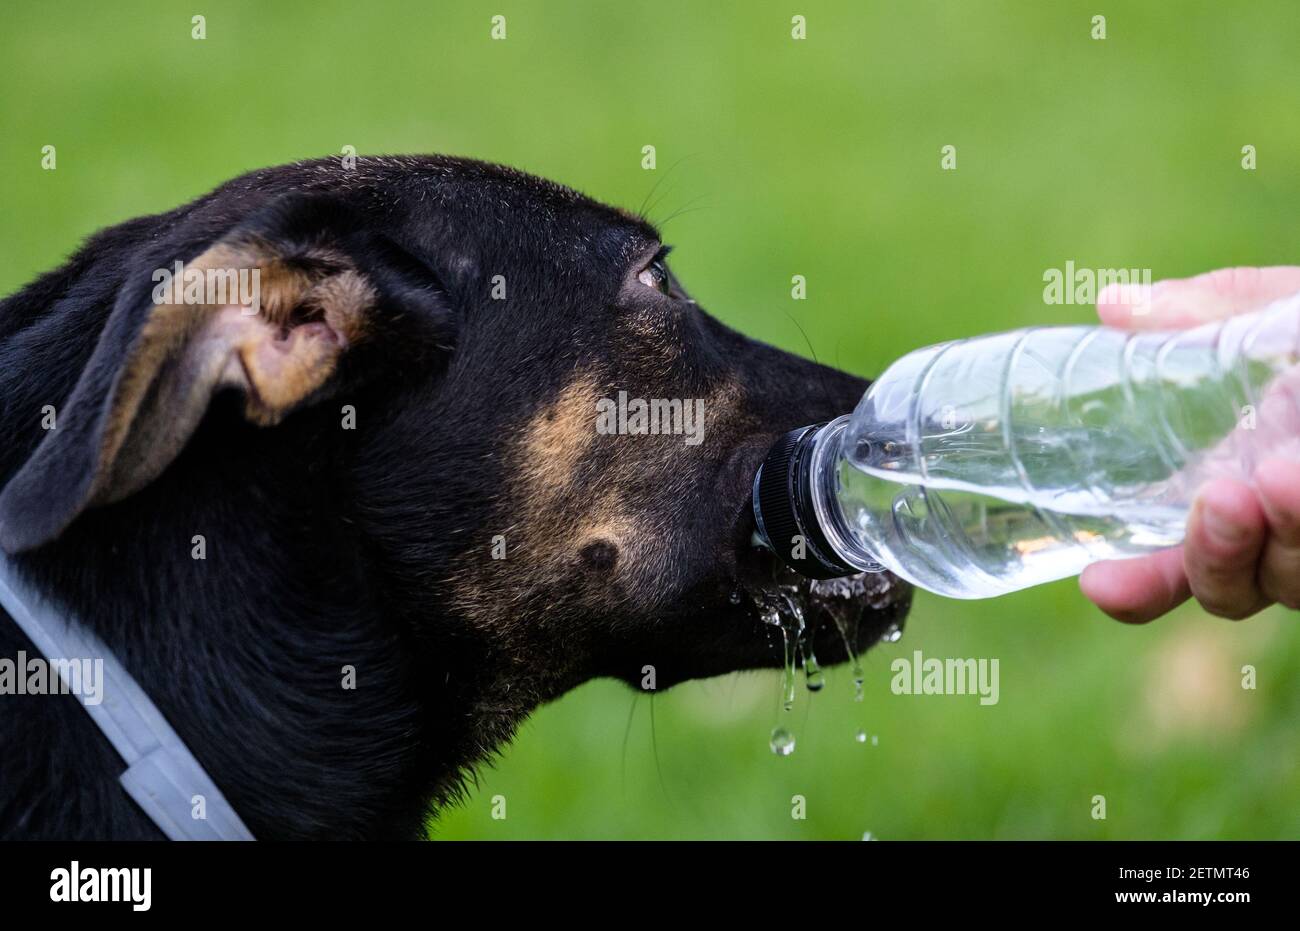 black dog portrait drinking water from a bottle in a park, summer heat hydration Stock Photo